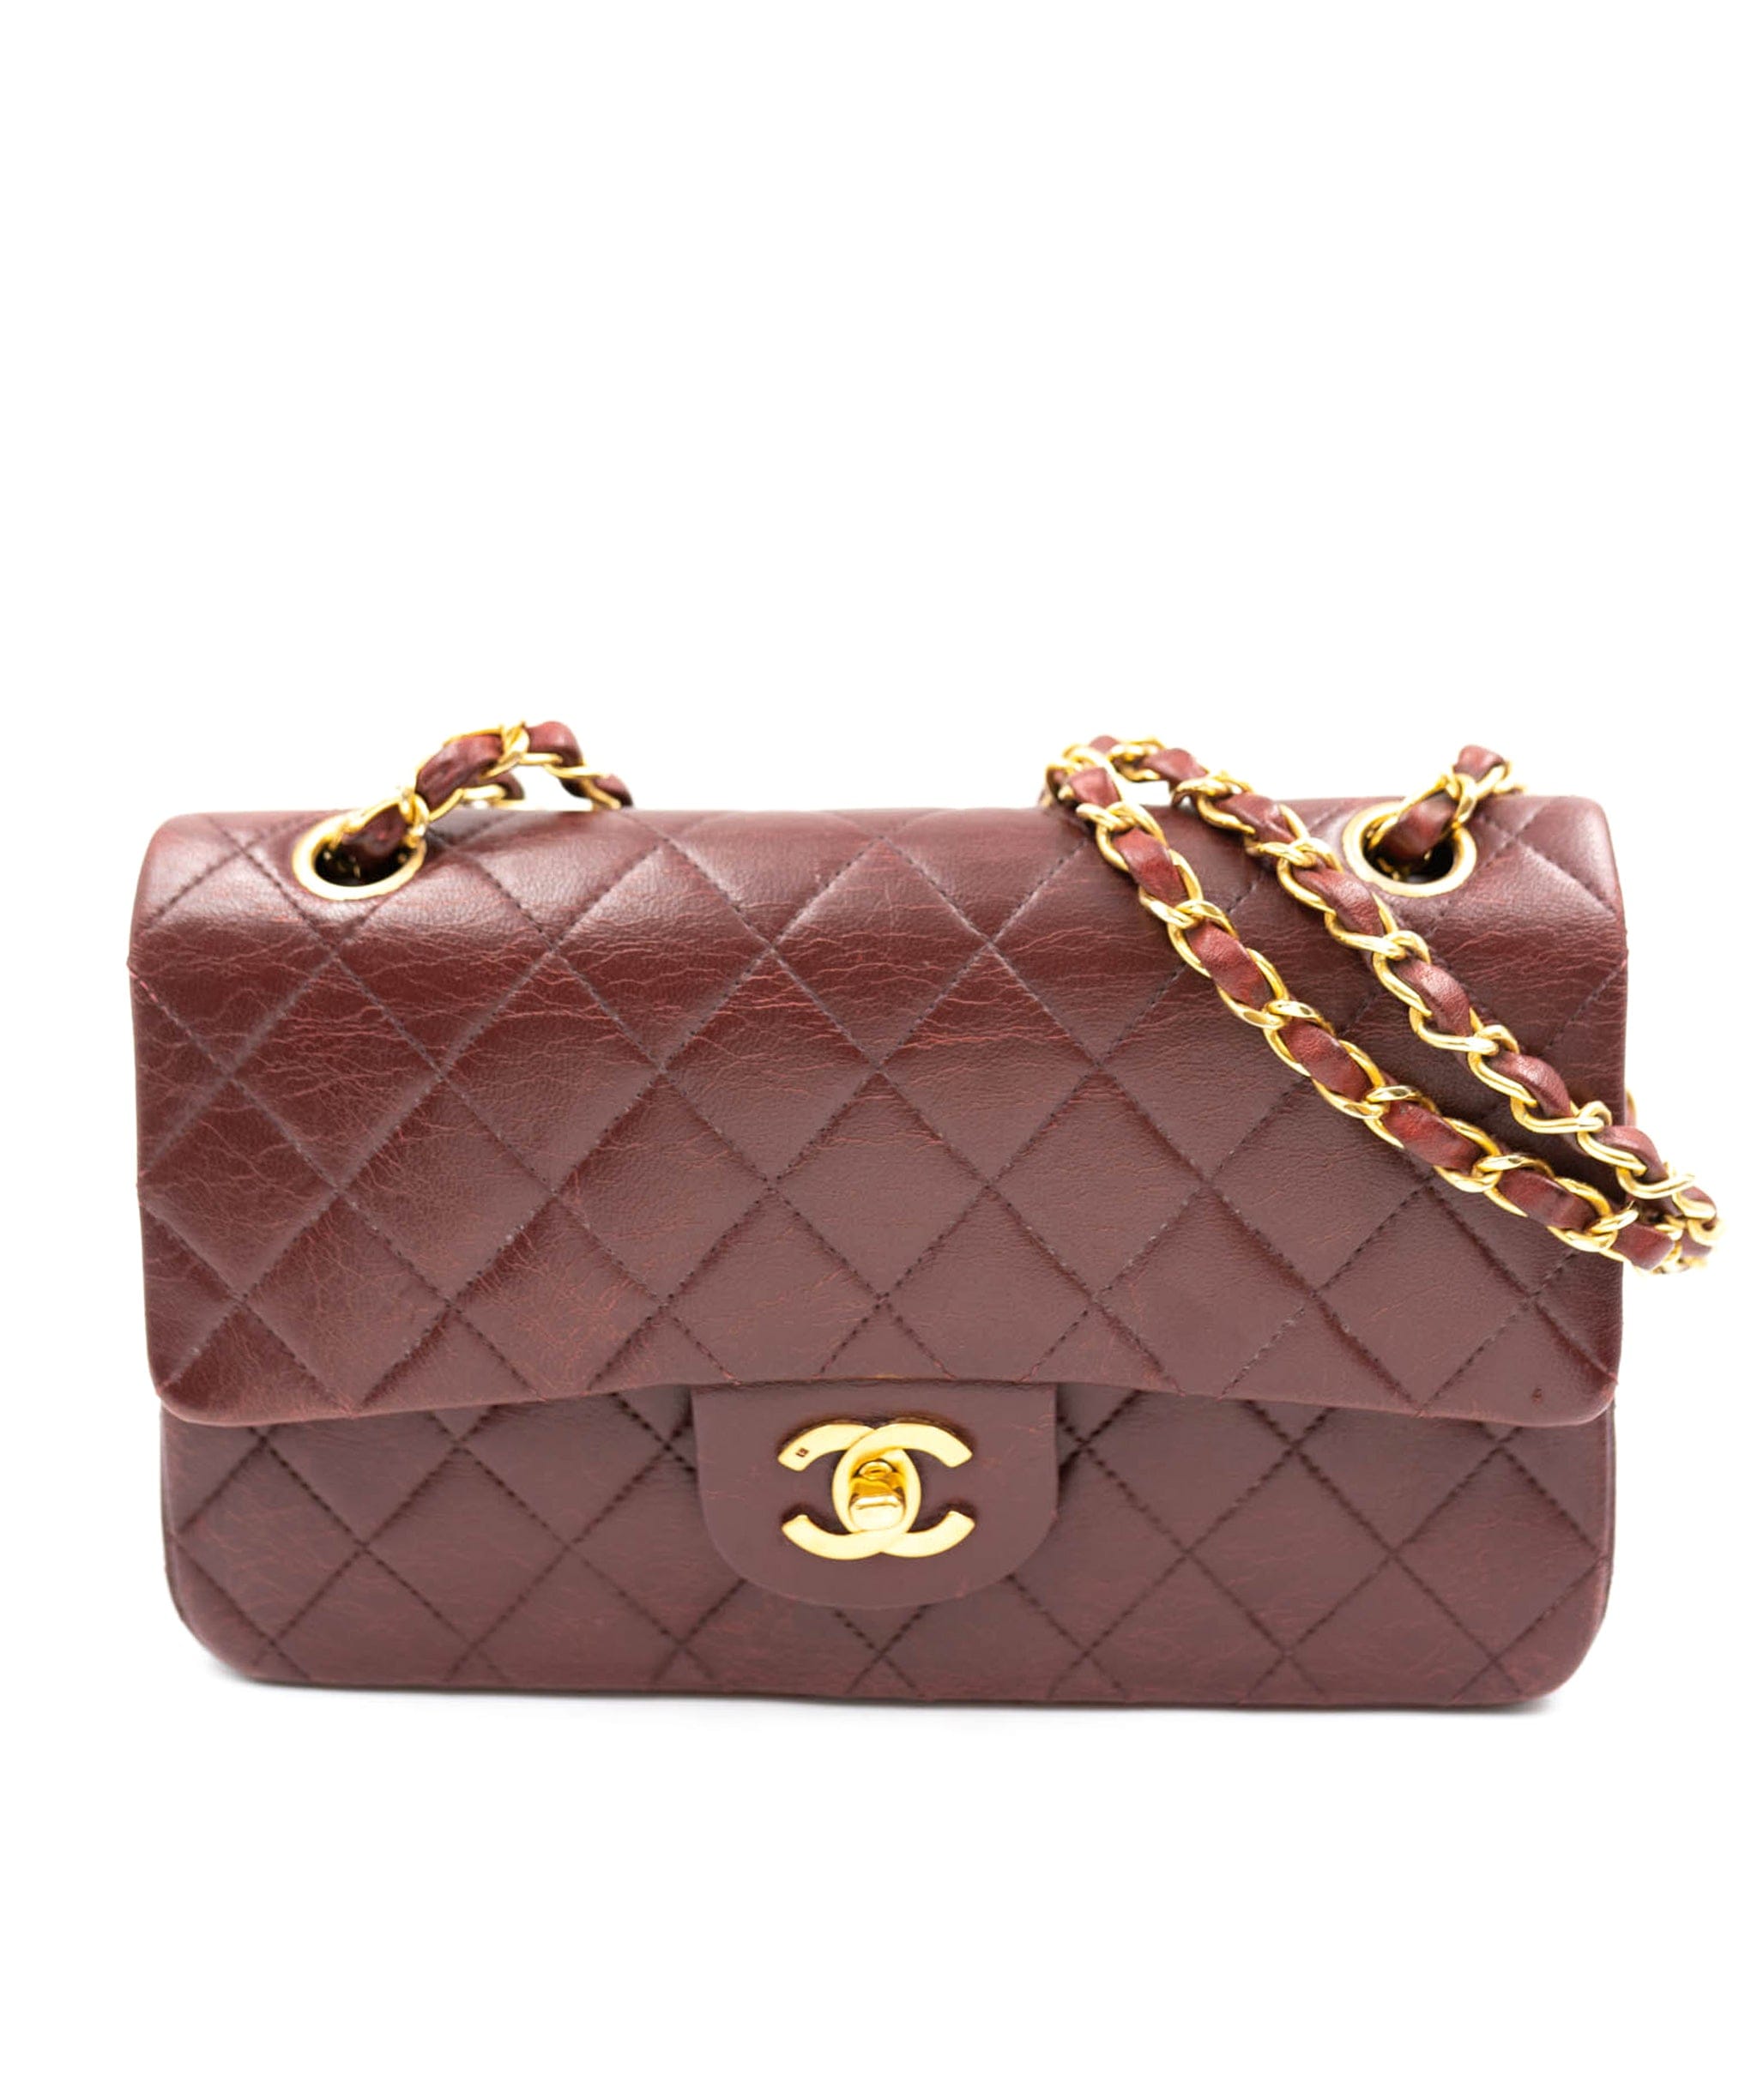 Vintage Chanel Burgundy Small Classic Double Flap Bag - ASL2464